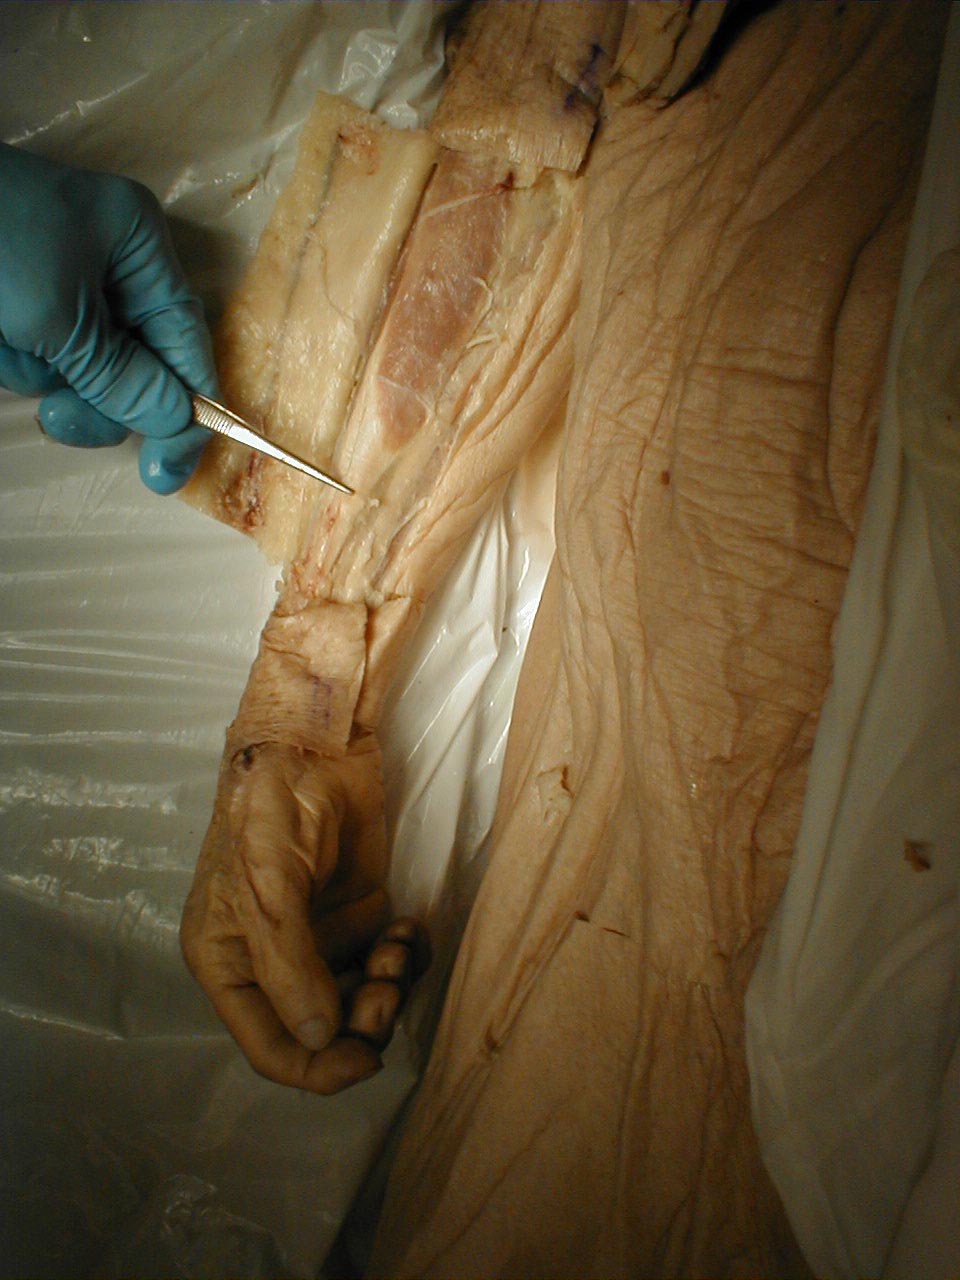 Brachioradialis tendon: The tendon is grasped by forceps (gross dissection)